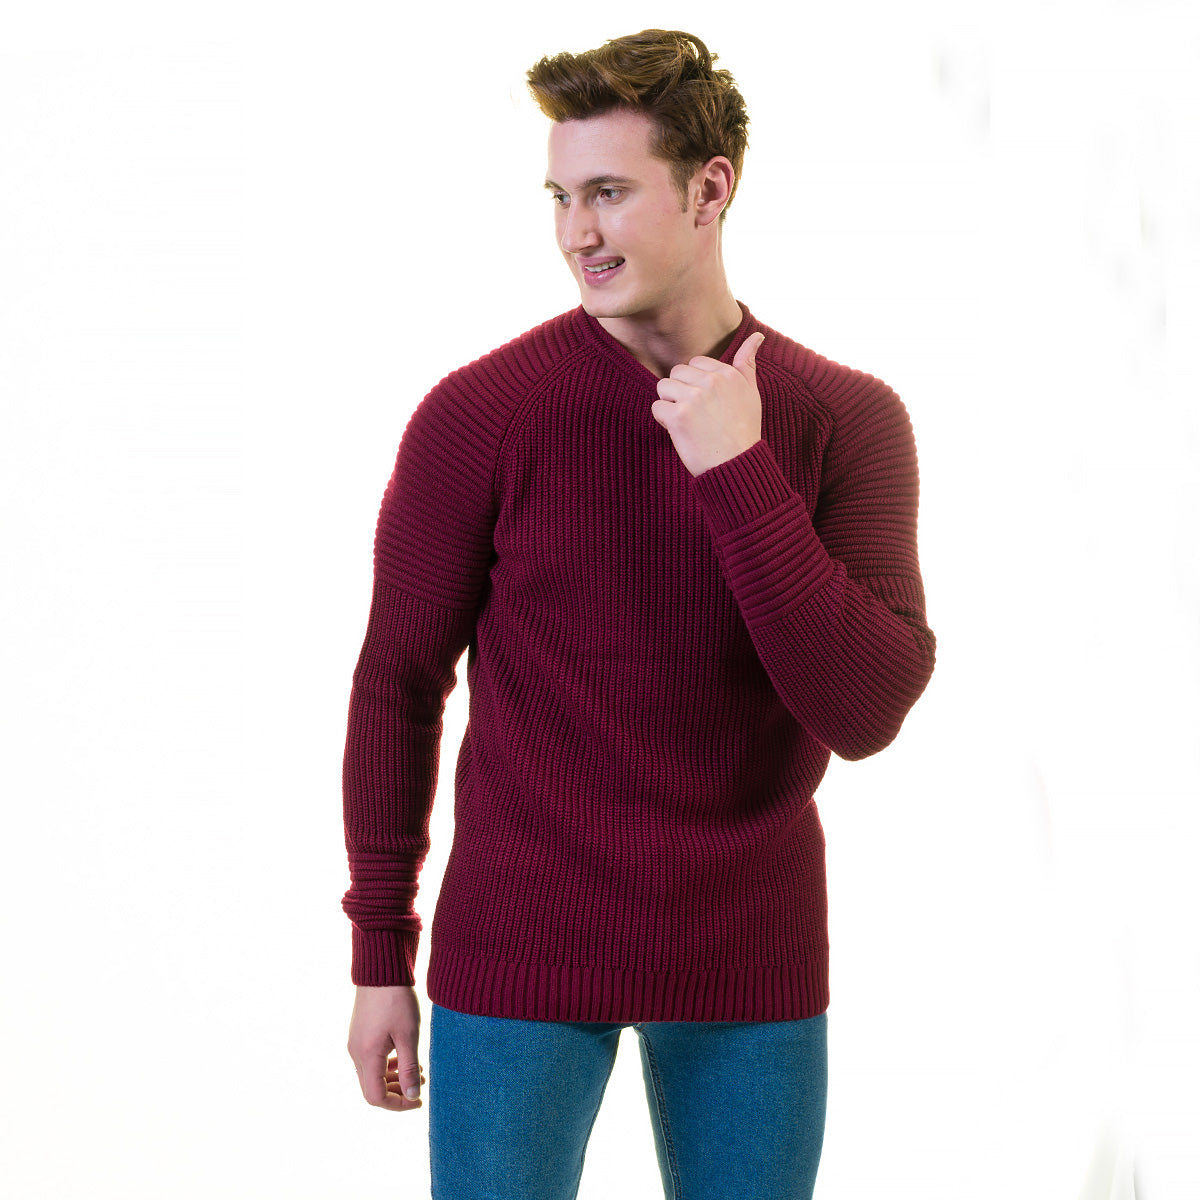 Solid Maroon European Wool Luxury Zippered With Sweater Jacket Warm Winter Tailor Fit